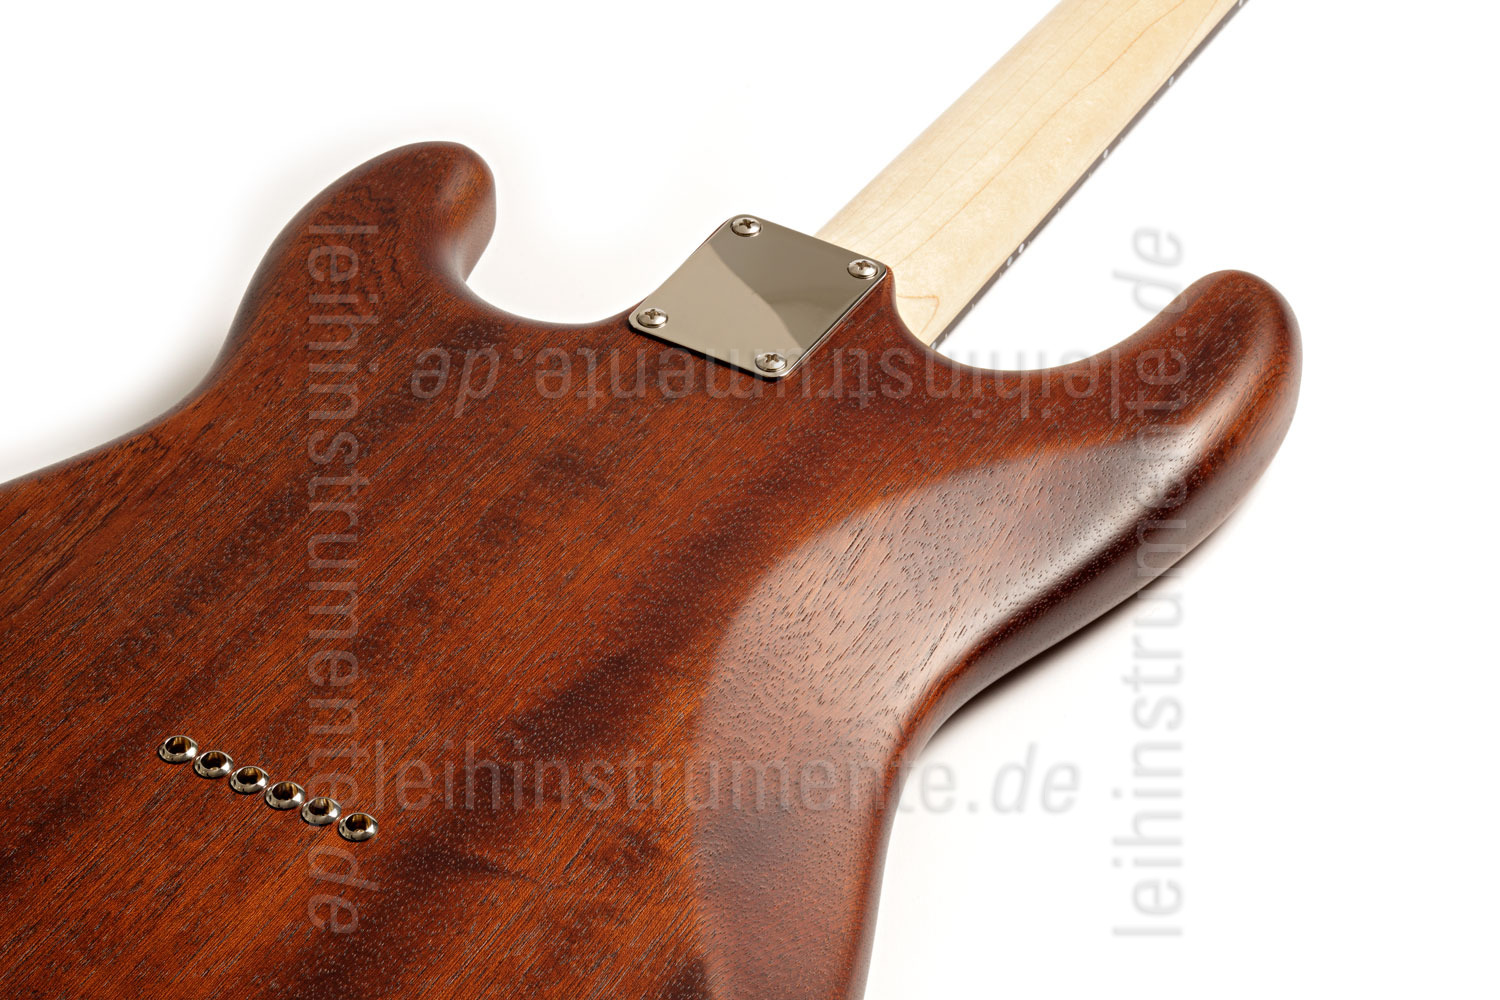 to article description / price Electric Guitar BERSTECHER Deluxe - Old Whisky / Floral Nature + hard case - made in Germany